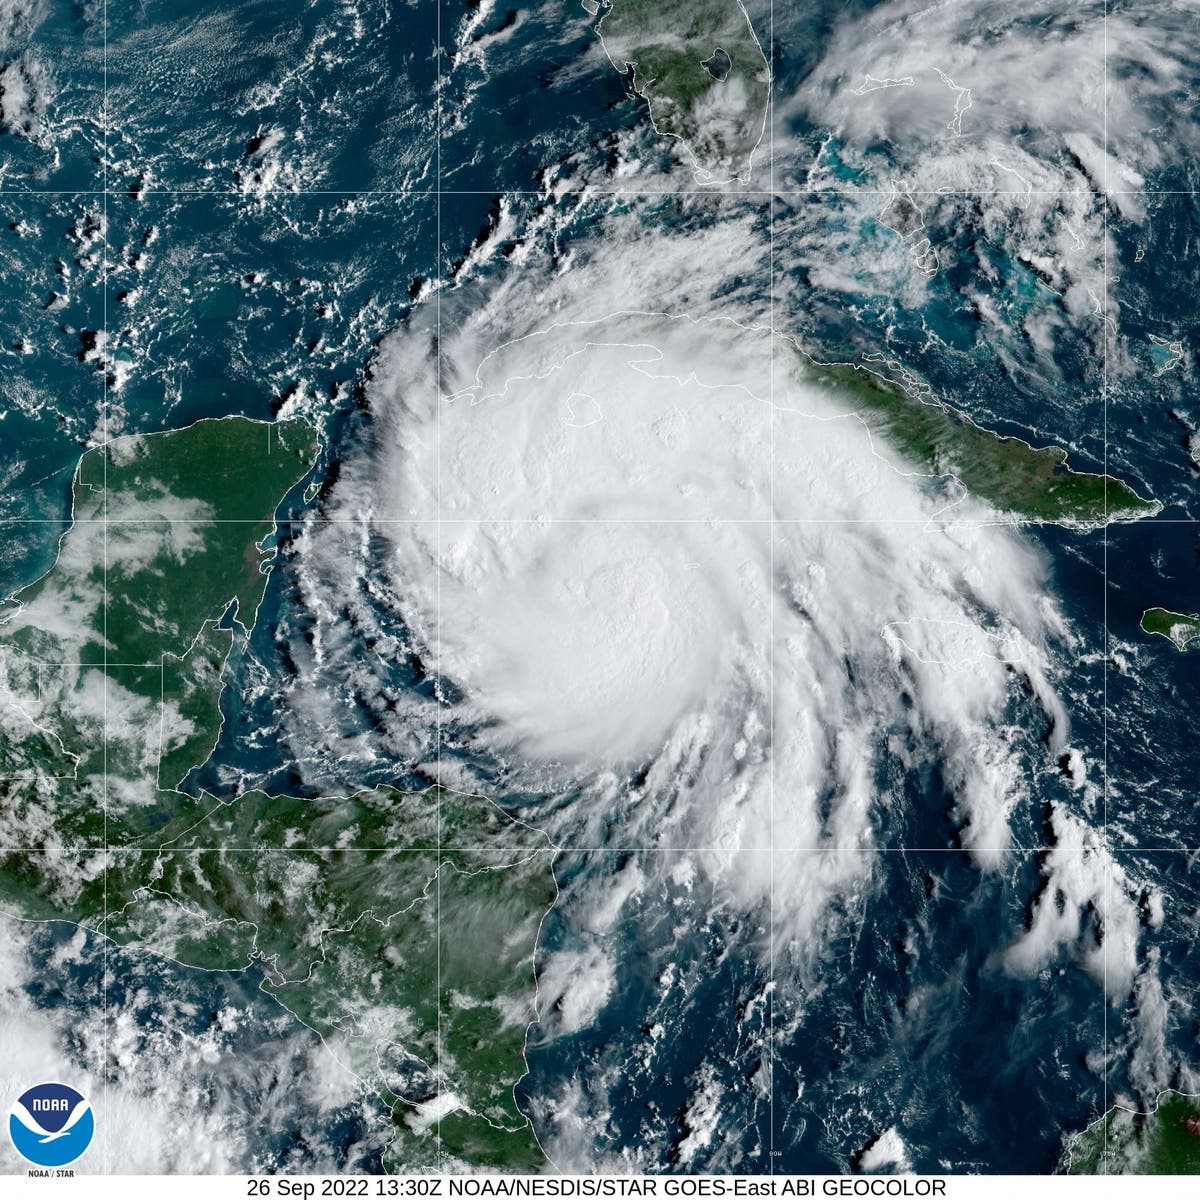 Hurricane Ian update: Fears of ‘major disaster’ as Cuba and Florida brace for category 4 storm